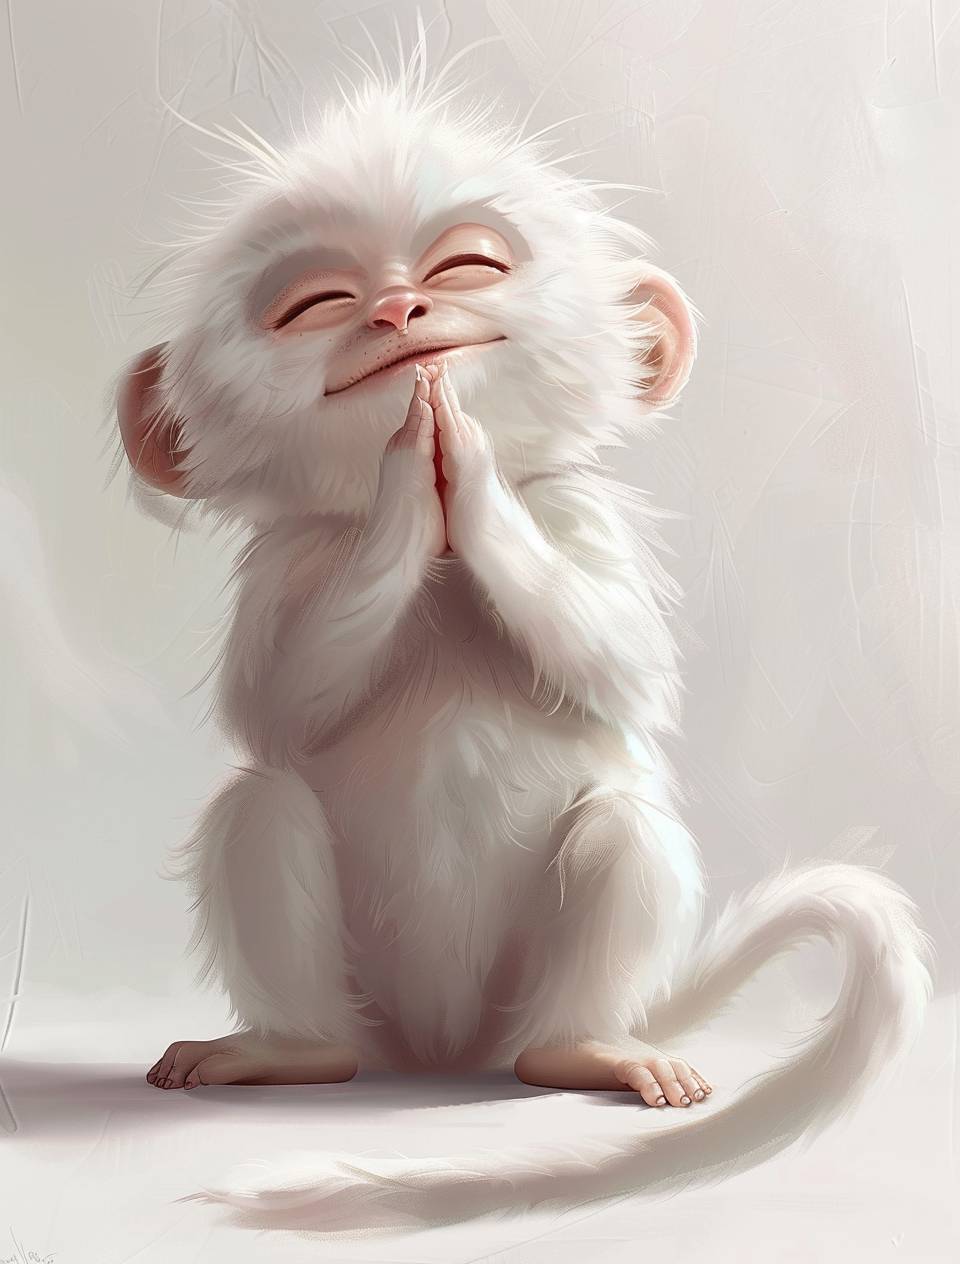 A cute white monkey with a chubby body and smiling expression, eyes closed and hands clasped together in prayer on its chest. A pure style background with a white clean wall. White fur all over its body, white ears, and a white tail. Anime style and Pixar art style.